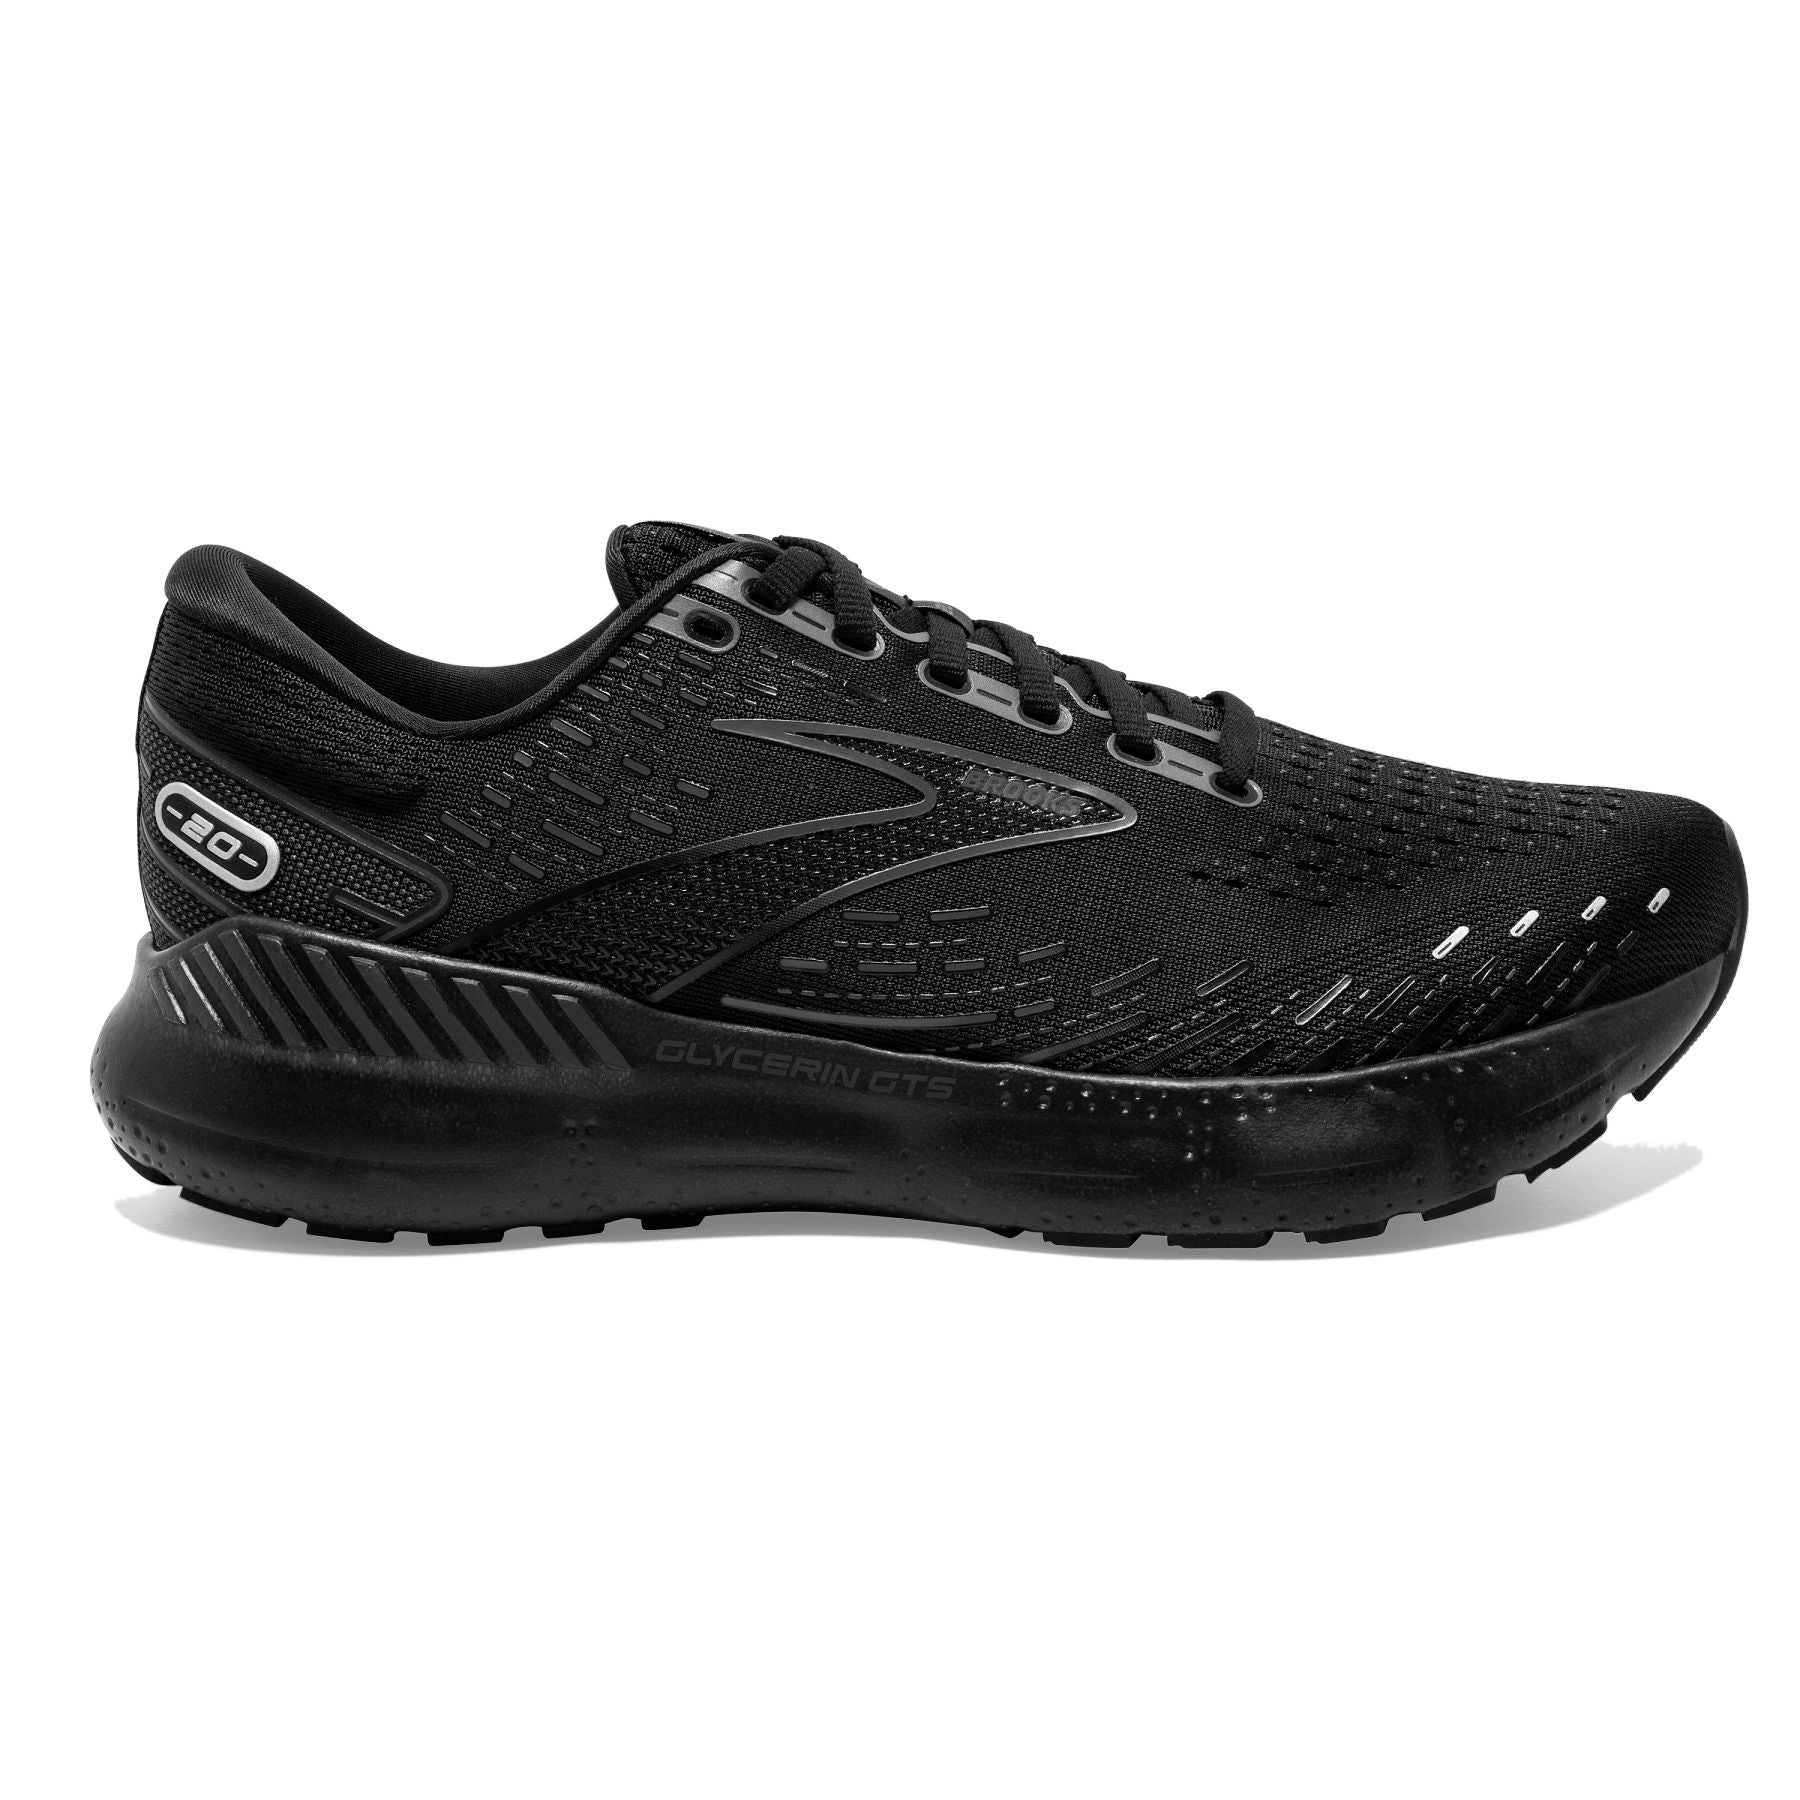 Lateral view of the Men's Glycerin GTS 20 in the wide 2E width, color Black/black/ebony